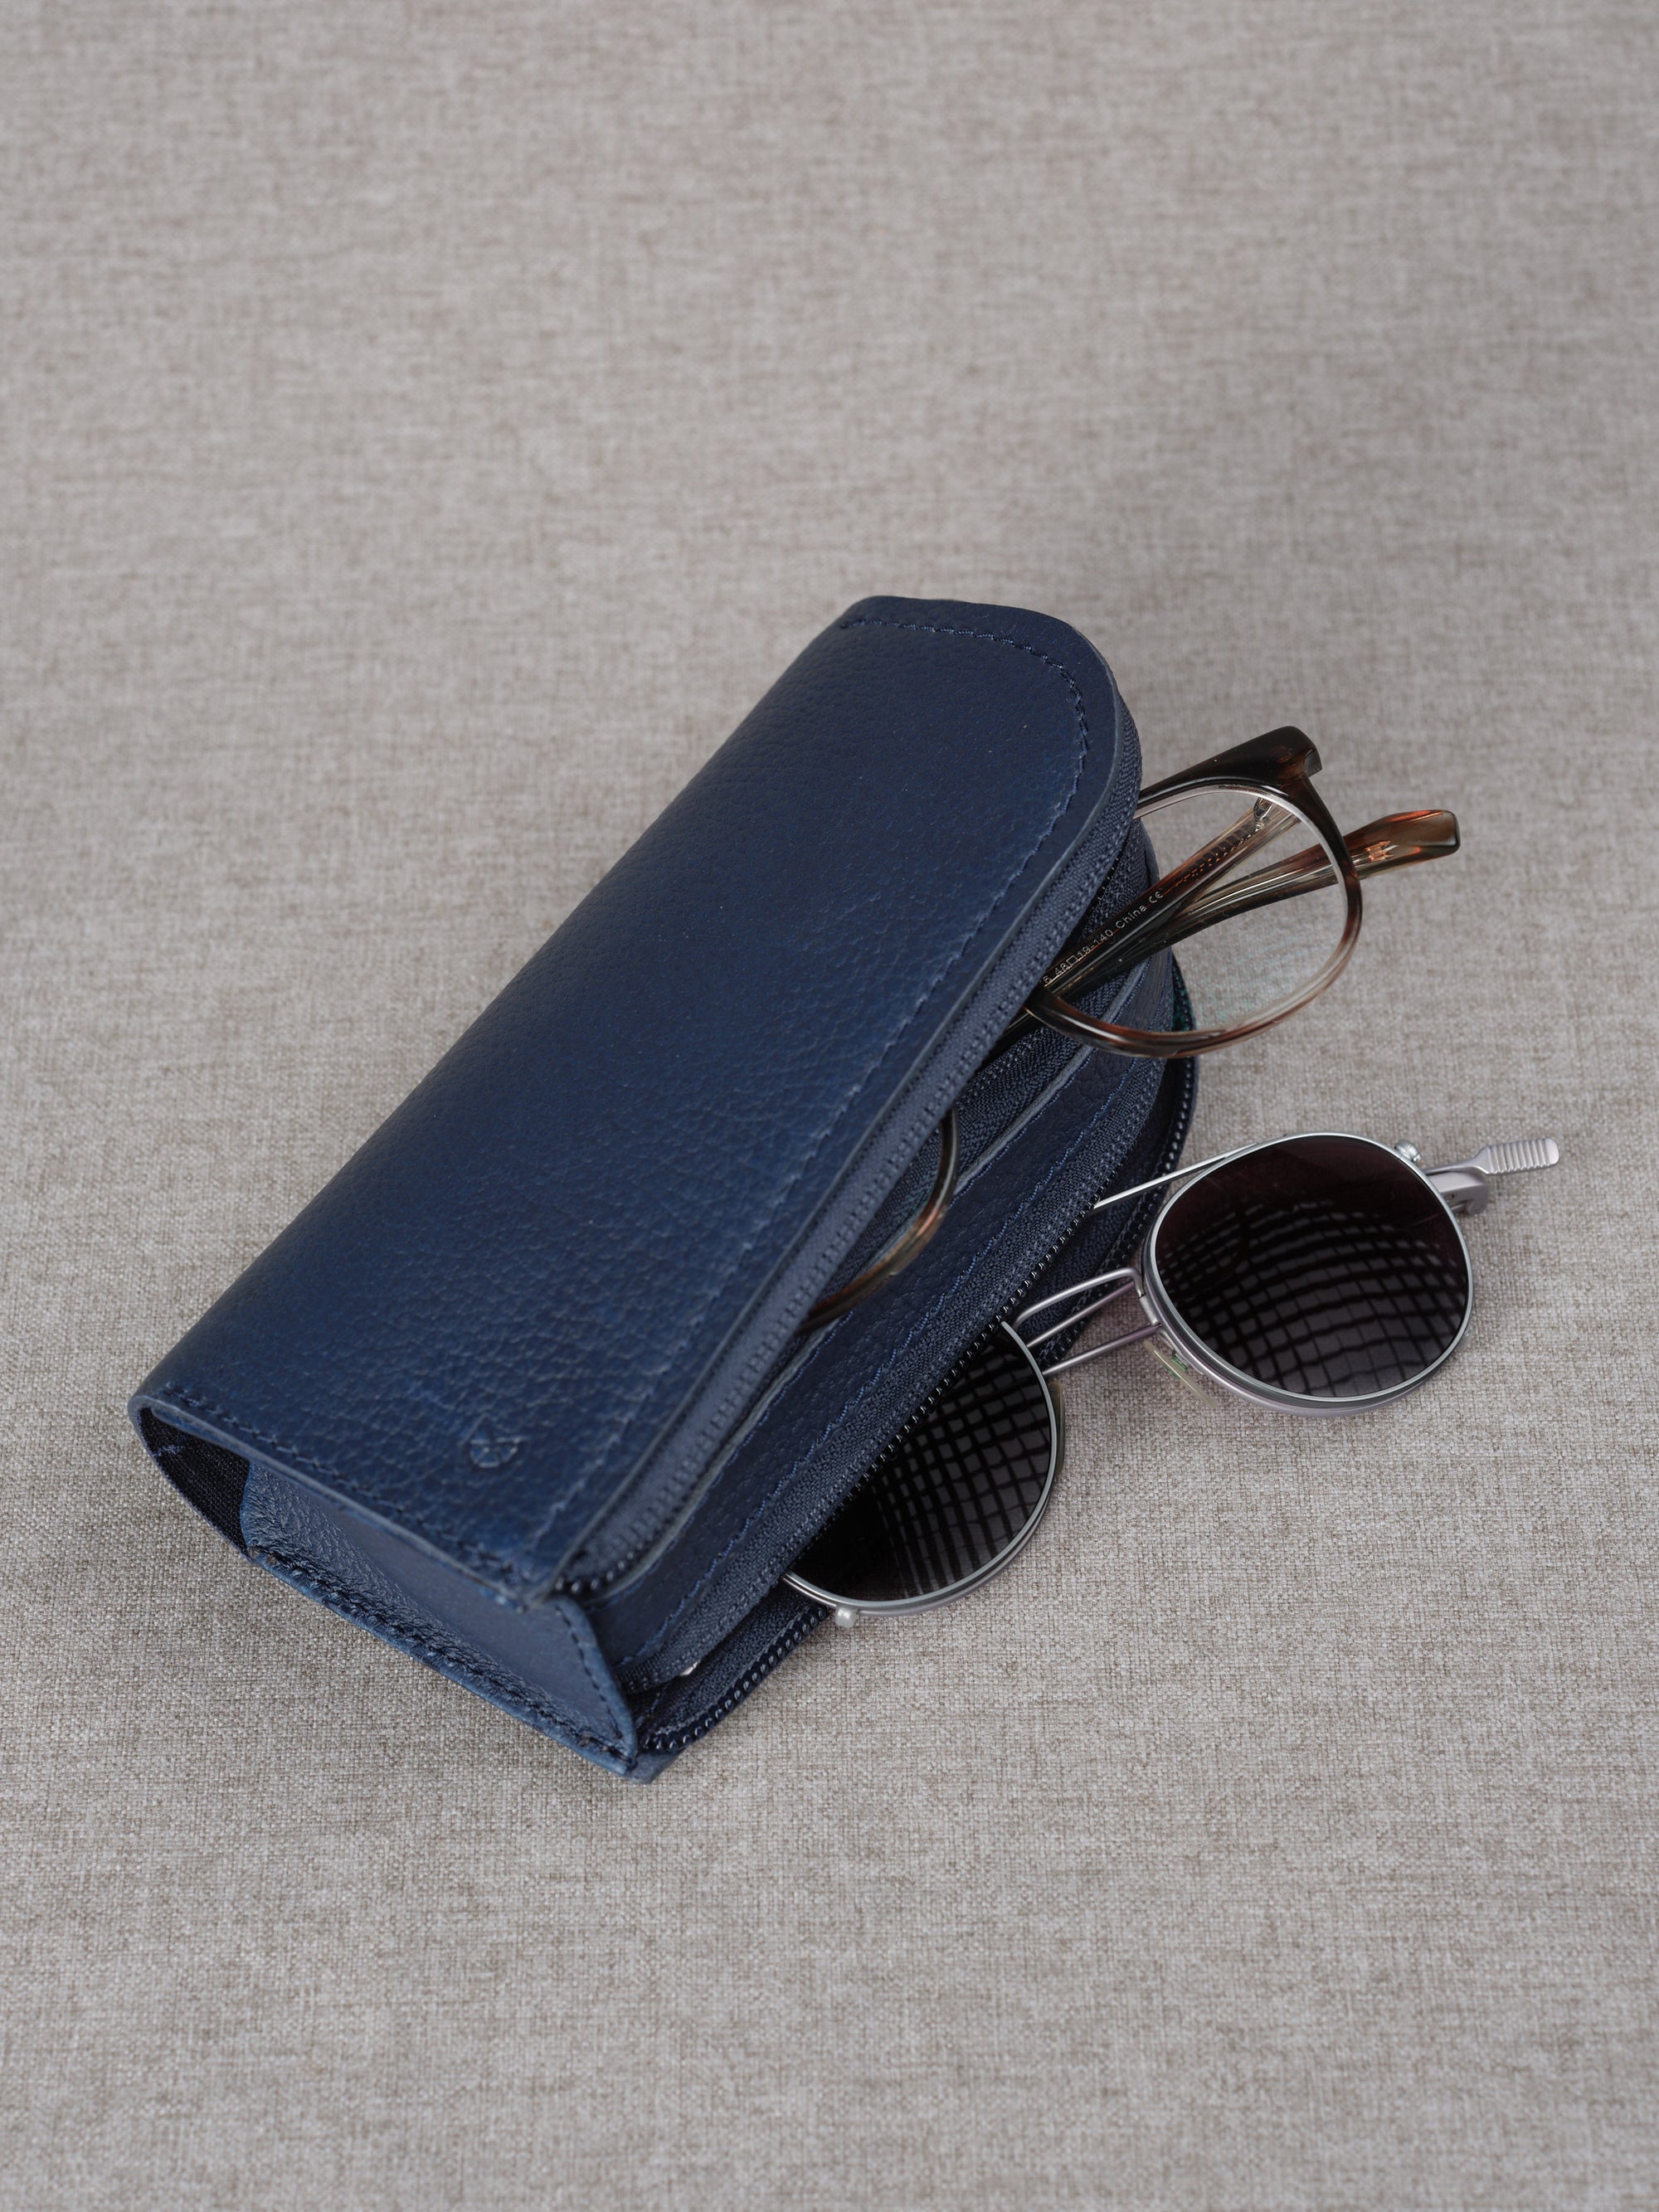 Rayban case navy by Capra Leather